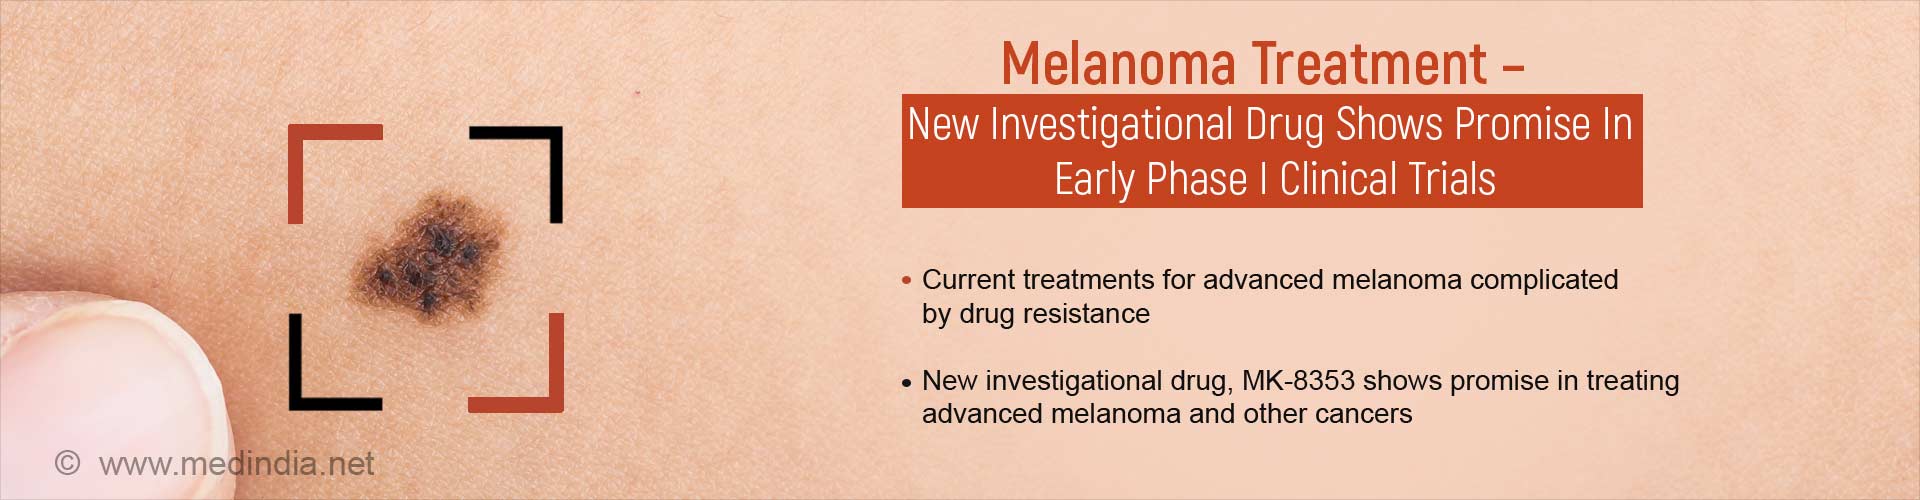 melanoma treatment - new inverstigational drug shows promise in early phase 1 clinical trials
- current treatments to advanced melanoma complicated by dug resistance
- new investigational drug, MK-8353 shows promise in treating advanced melanoma and other cancers